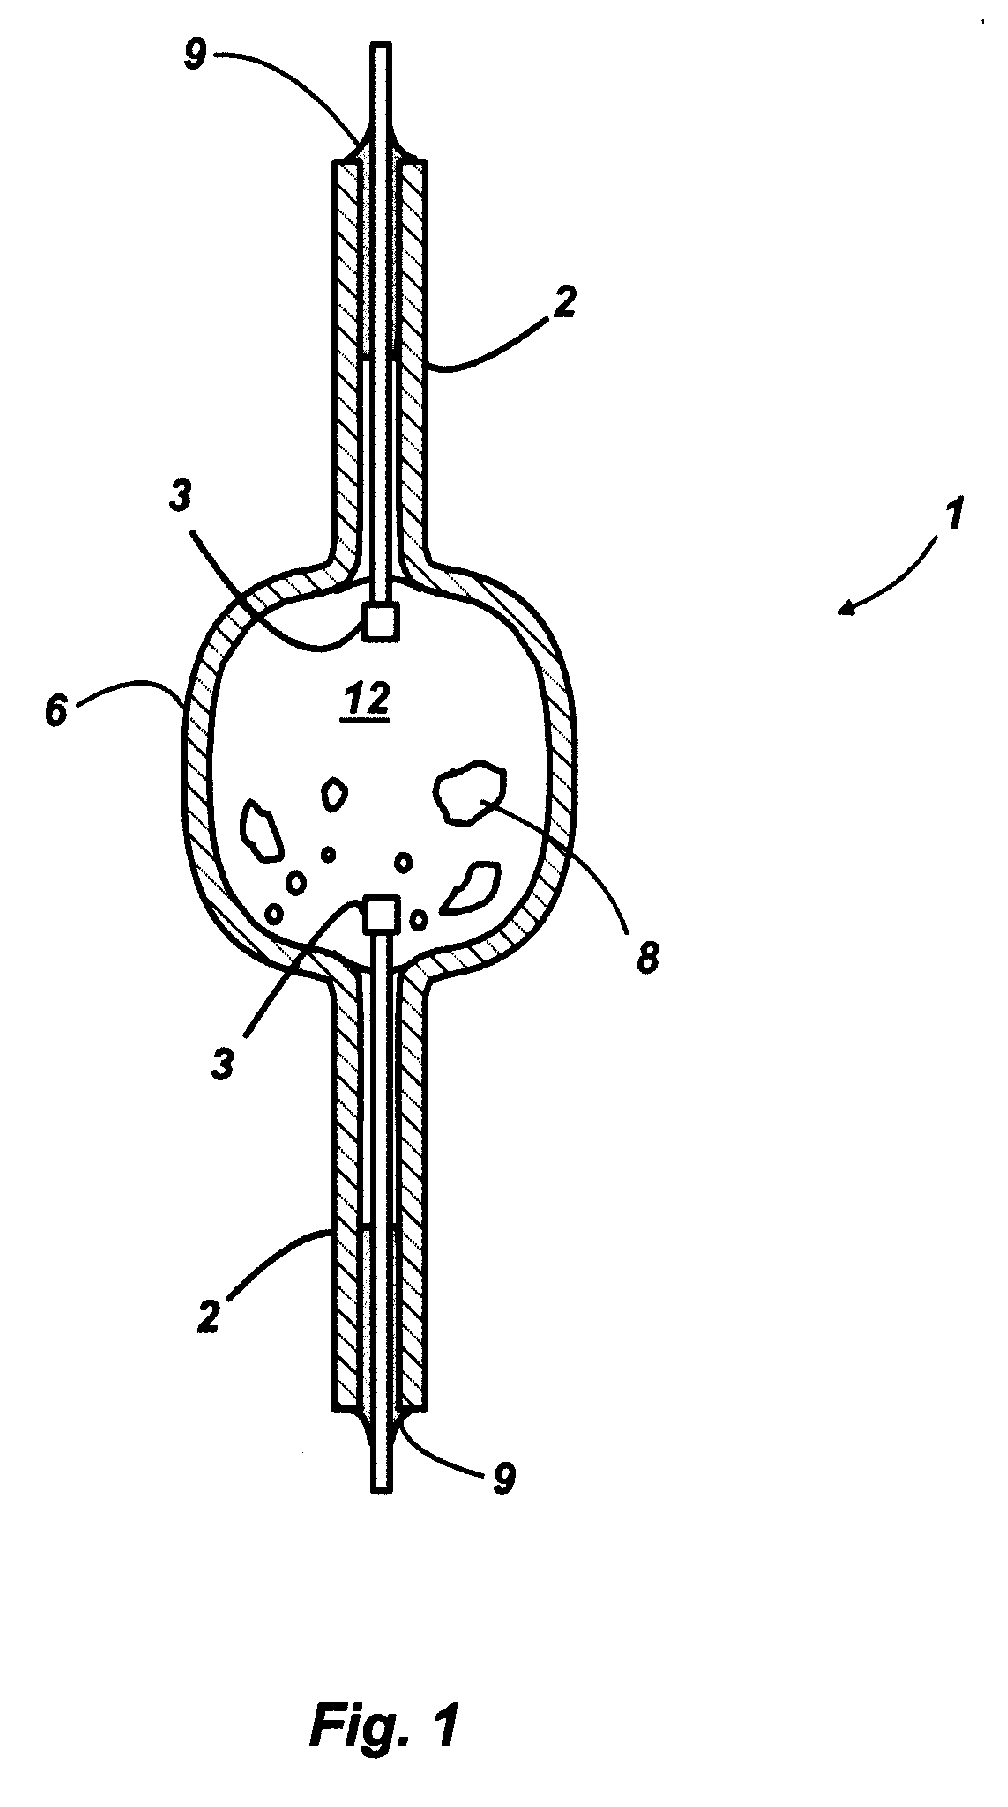 Method of Making Ceramic Discharge Vessels Using Stereolithography